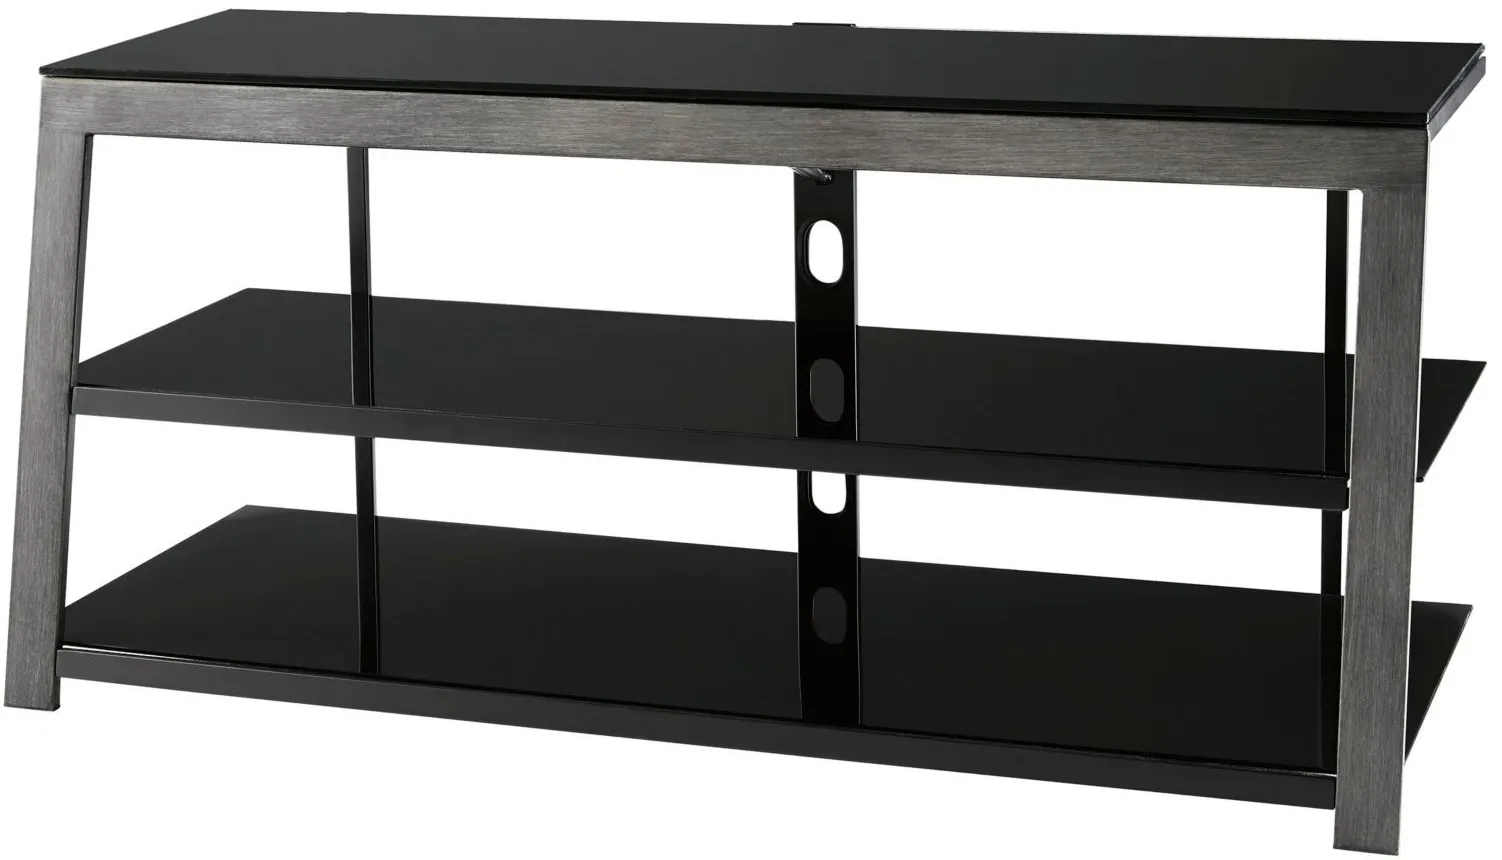 Pryor 48" TV Console in Black by Ashley Furniture